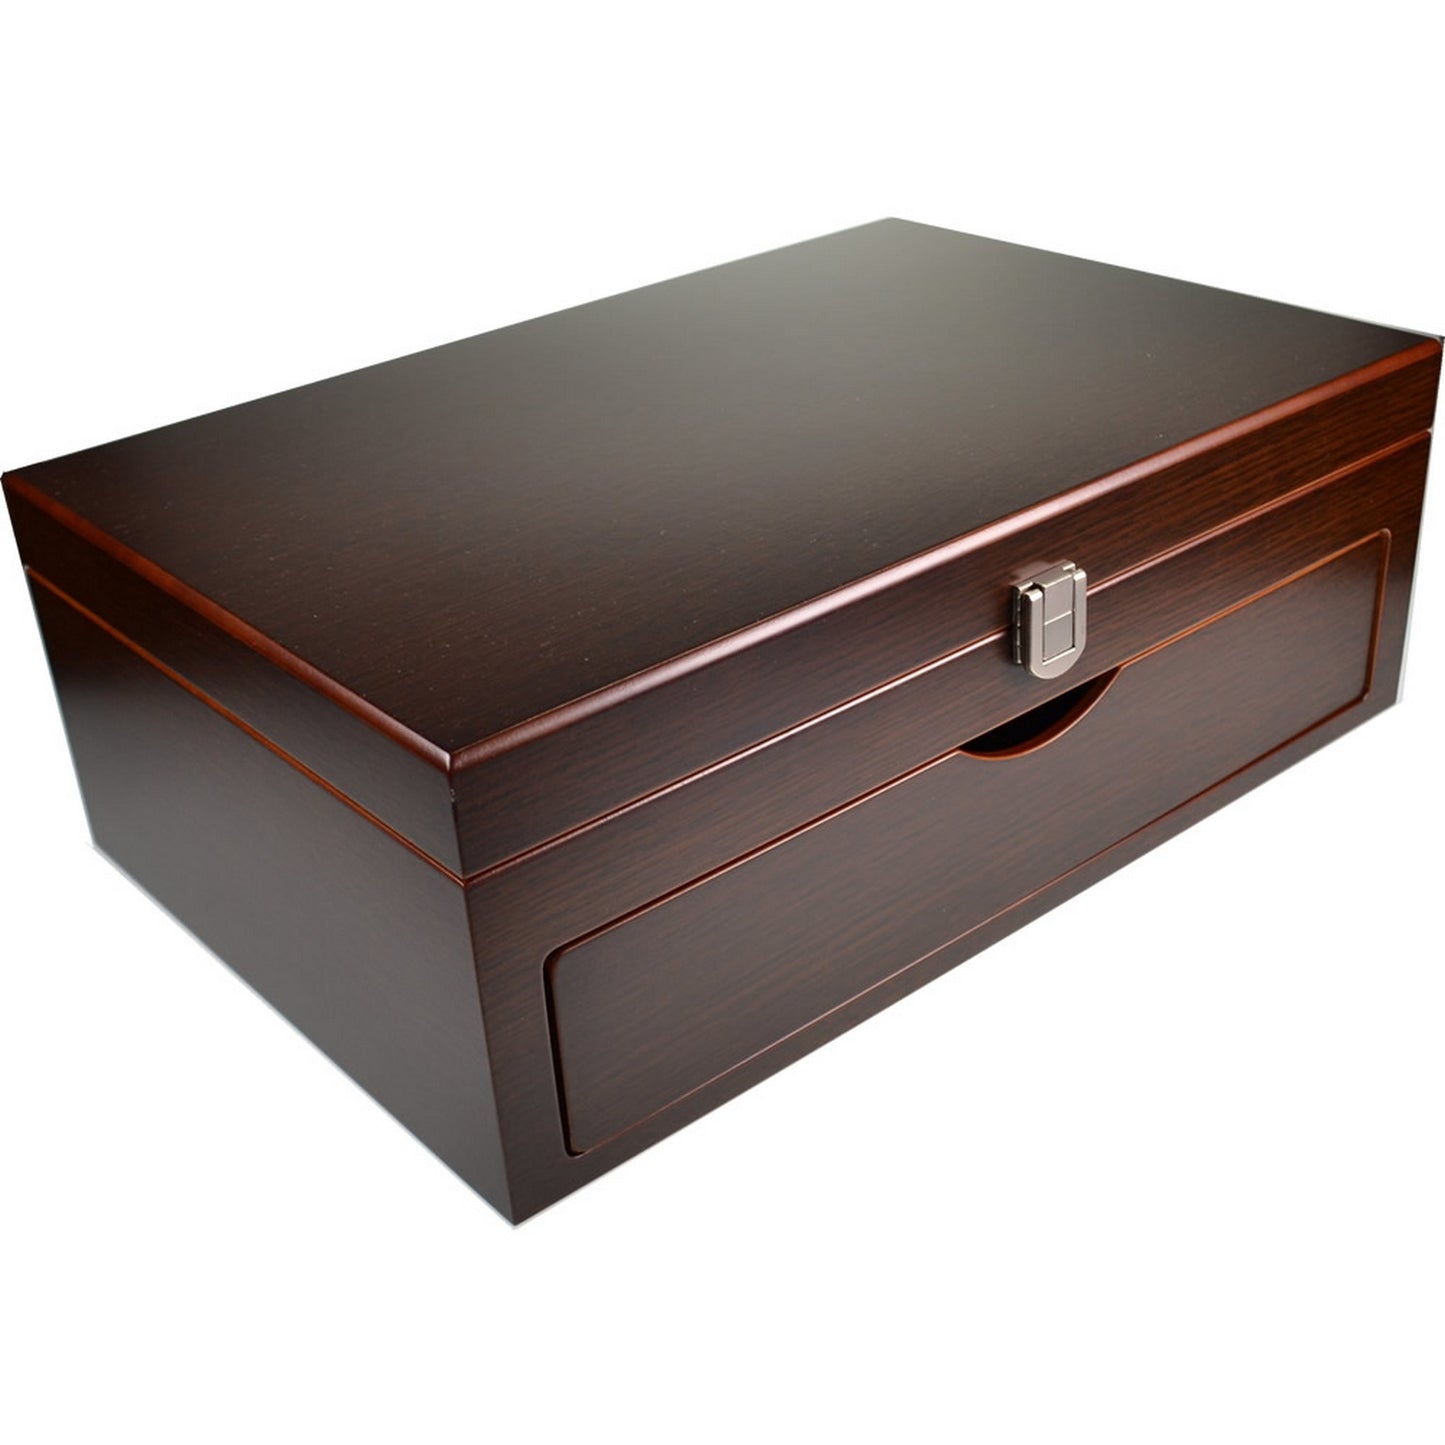 Valet Box - Dark Kassod Wood with Leather Lined Drawer